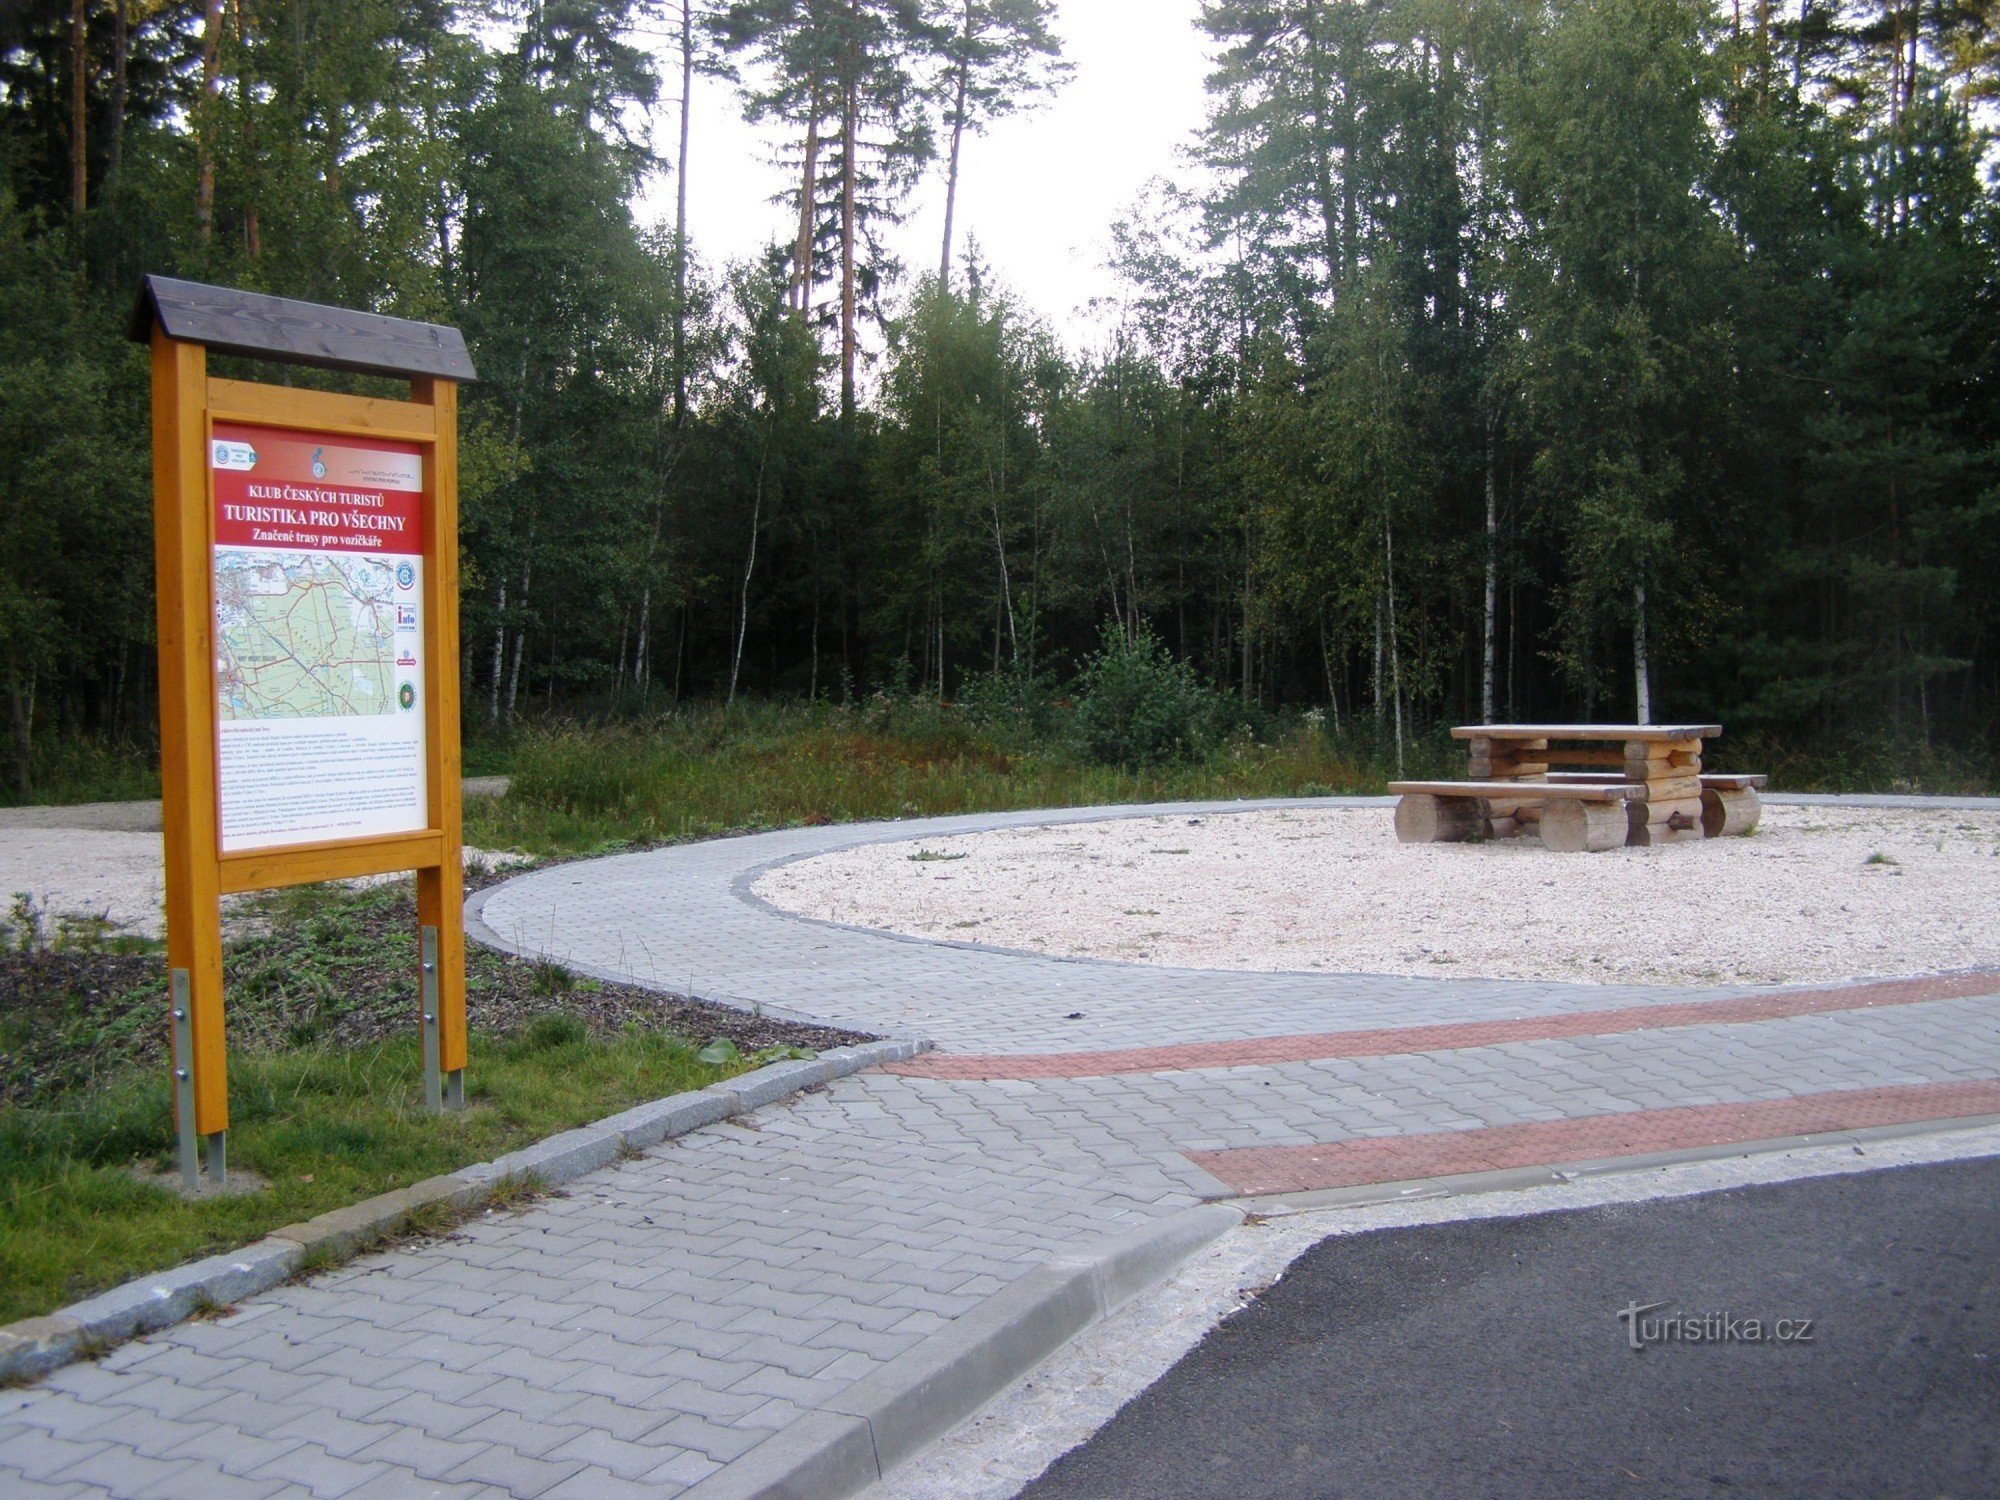 Wheelchair trails in the forests of Hradec Králové